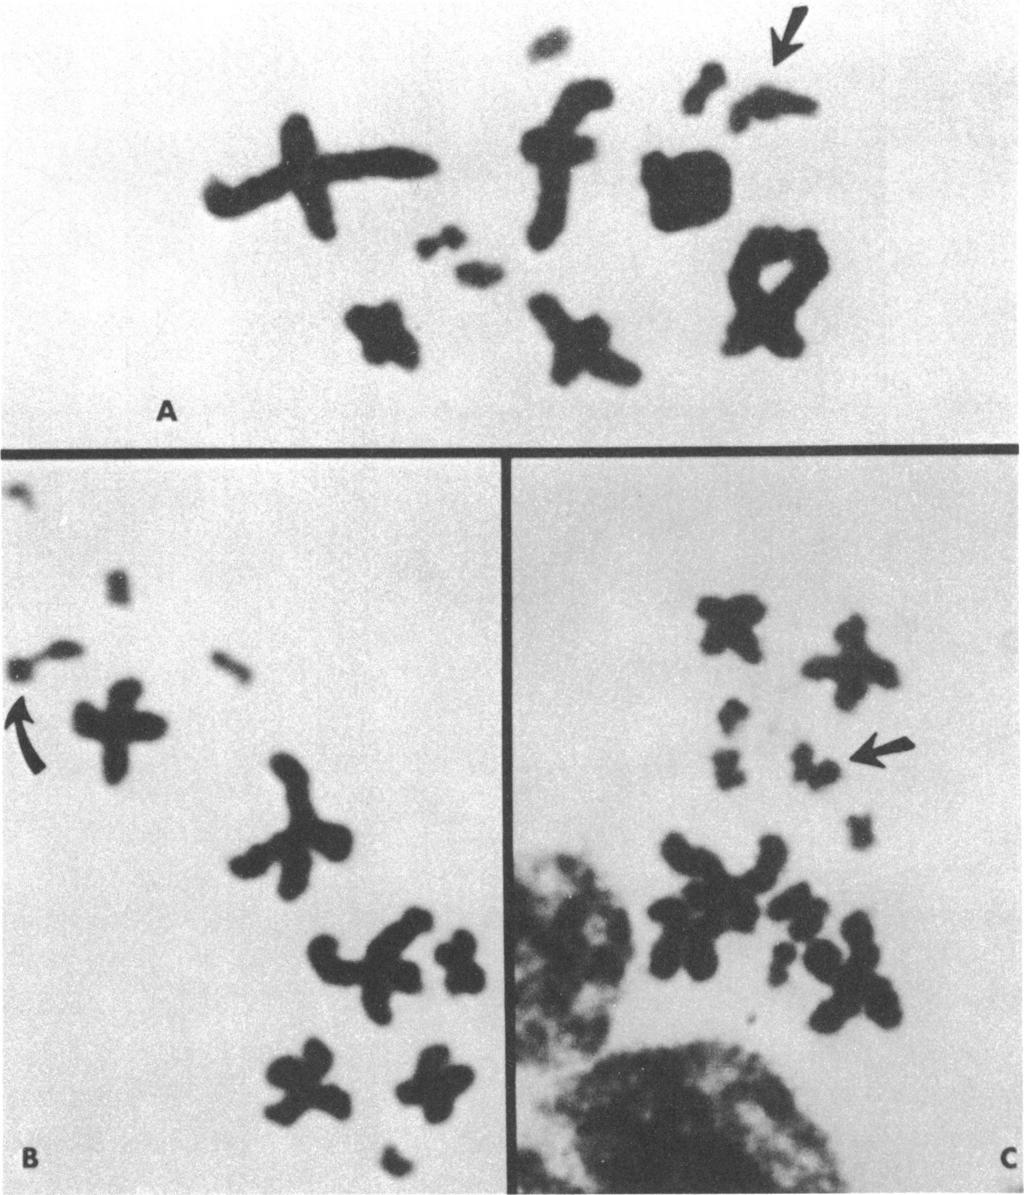 20 AMERICAN MUSEUM NOVITATES NO. 243 1 A S B FIG. 7. Spermatocytes of Sceloporus lundelli. A. Primary spermatocyte (metaphase I), with six bivalents of macrochromosomes + five bivalents of smaller ones (n = 11).